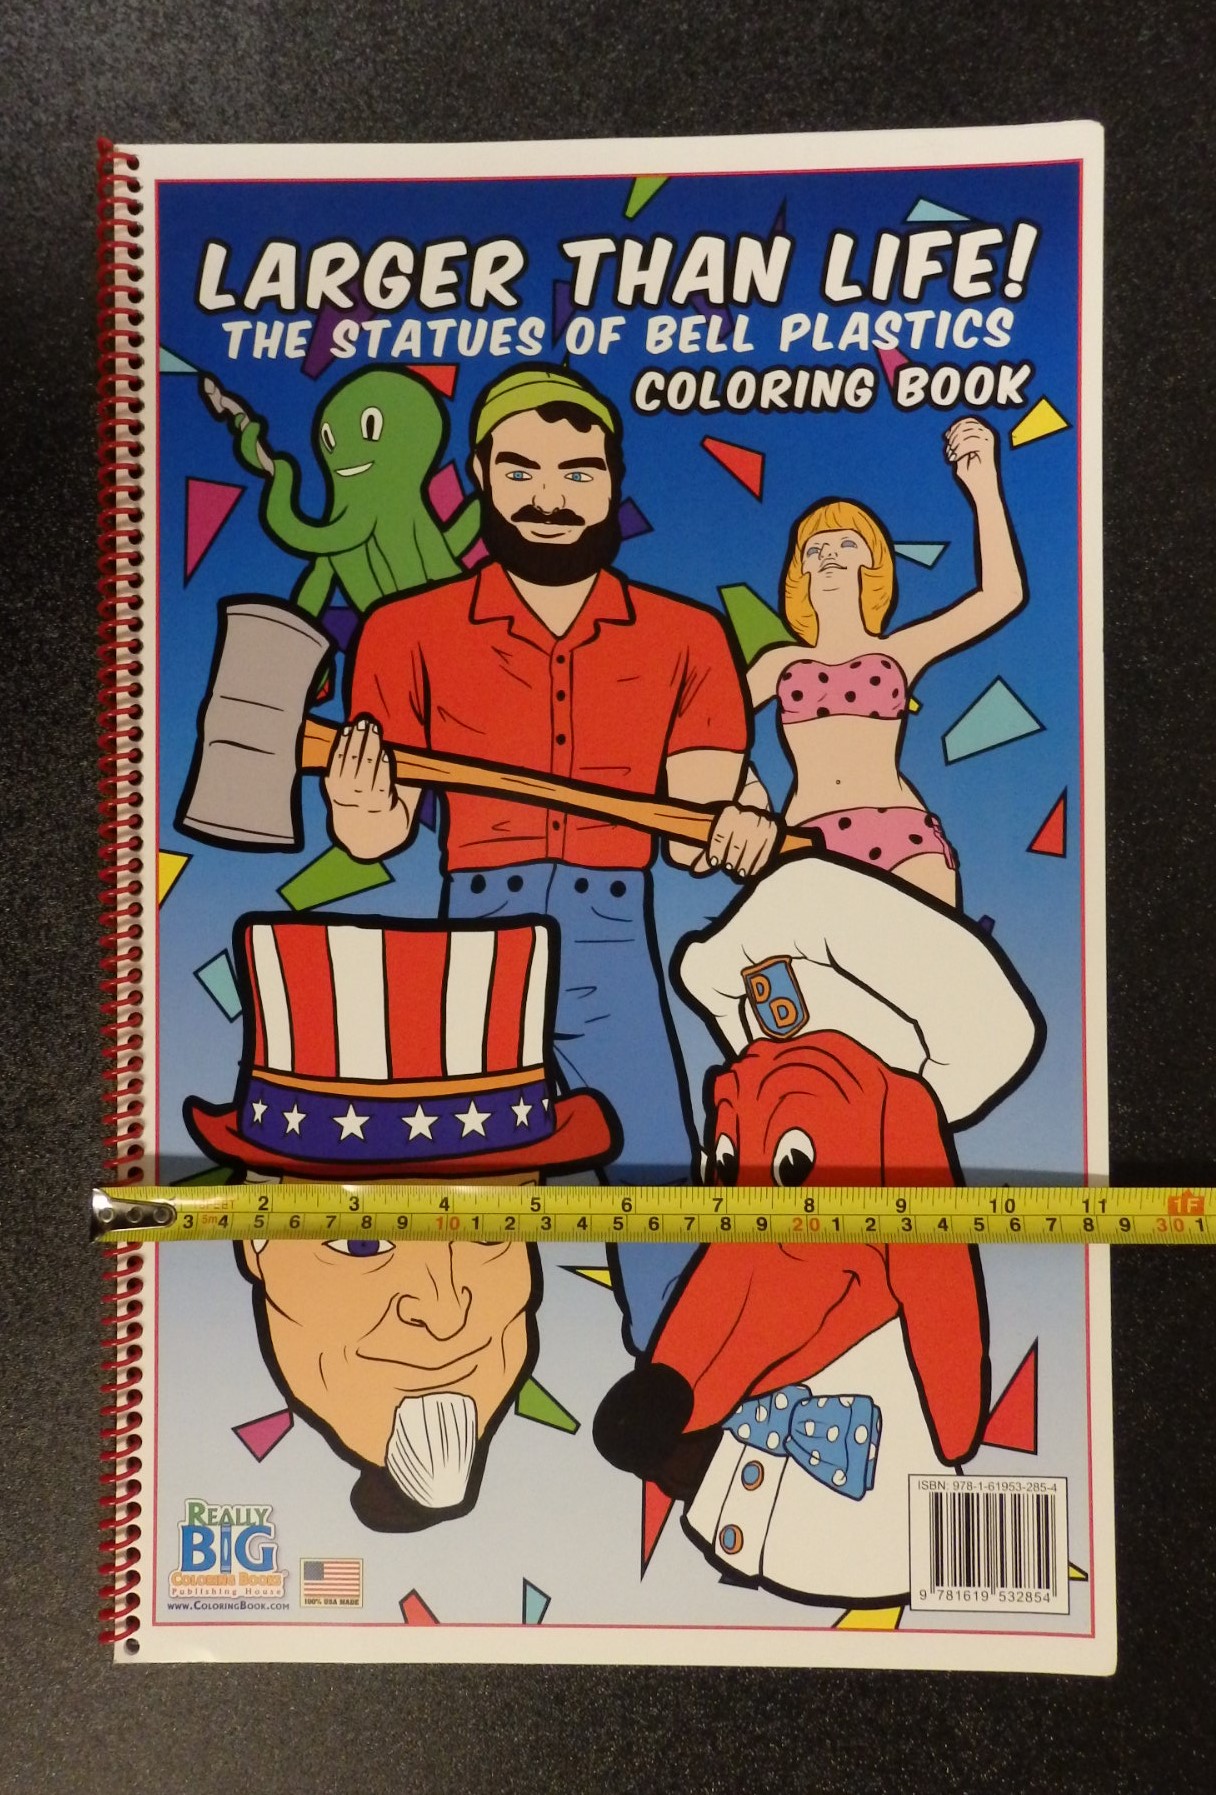 Big Mike's coloring book